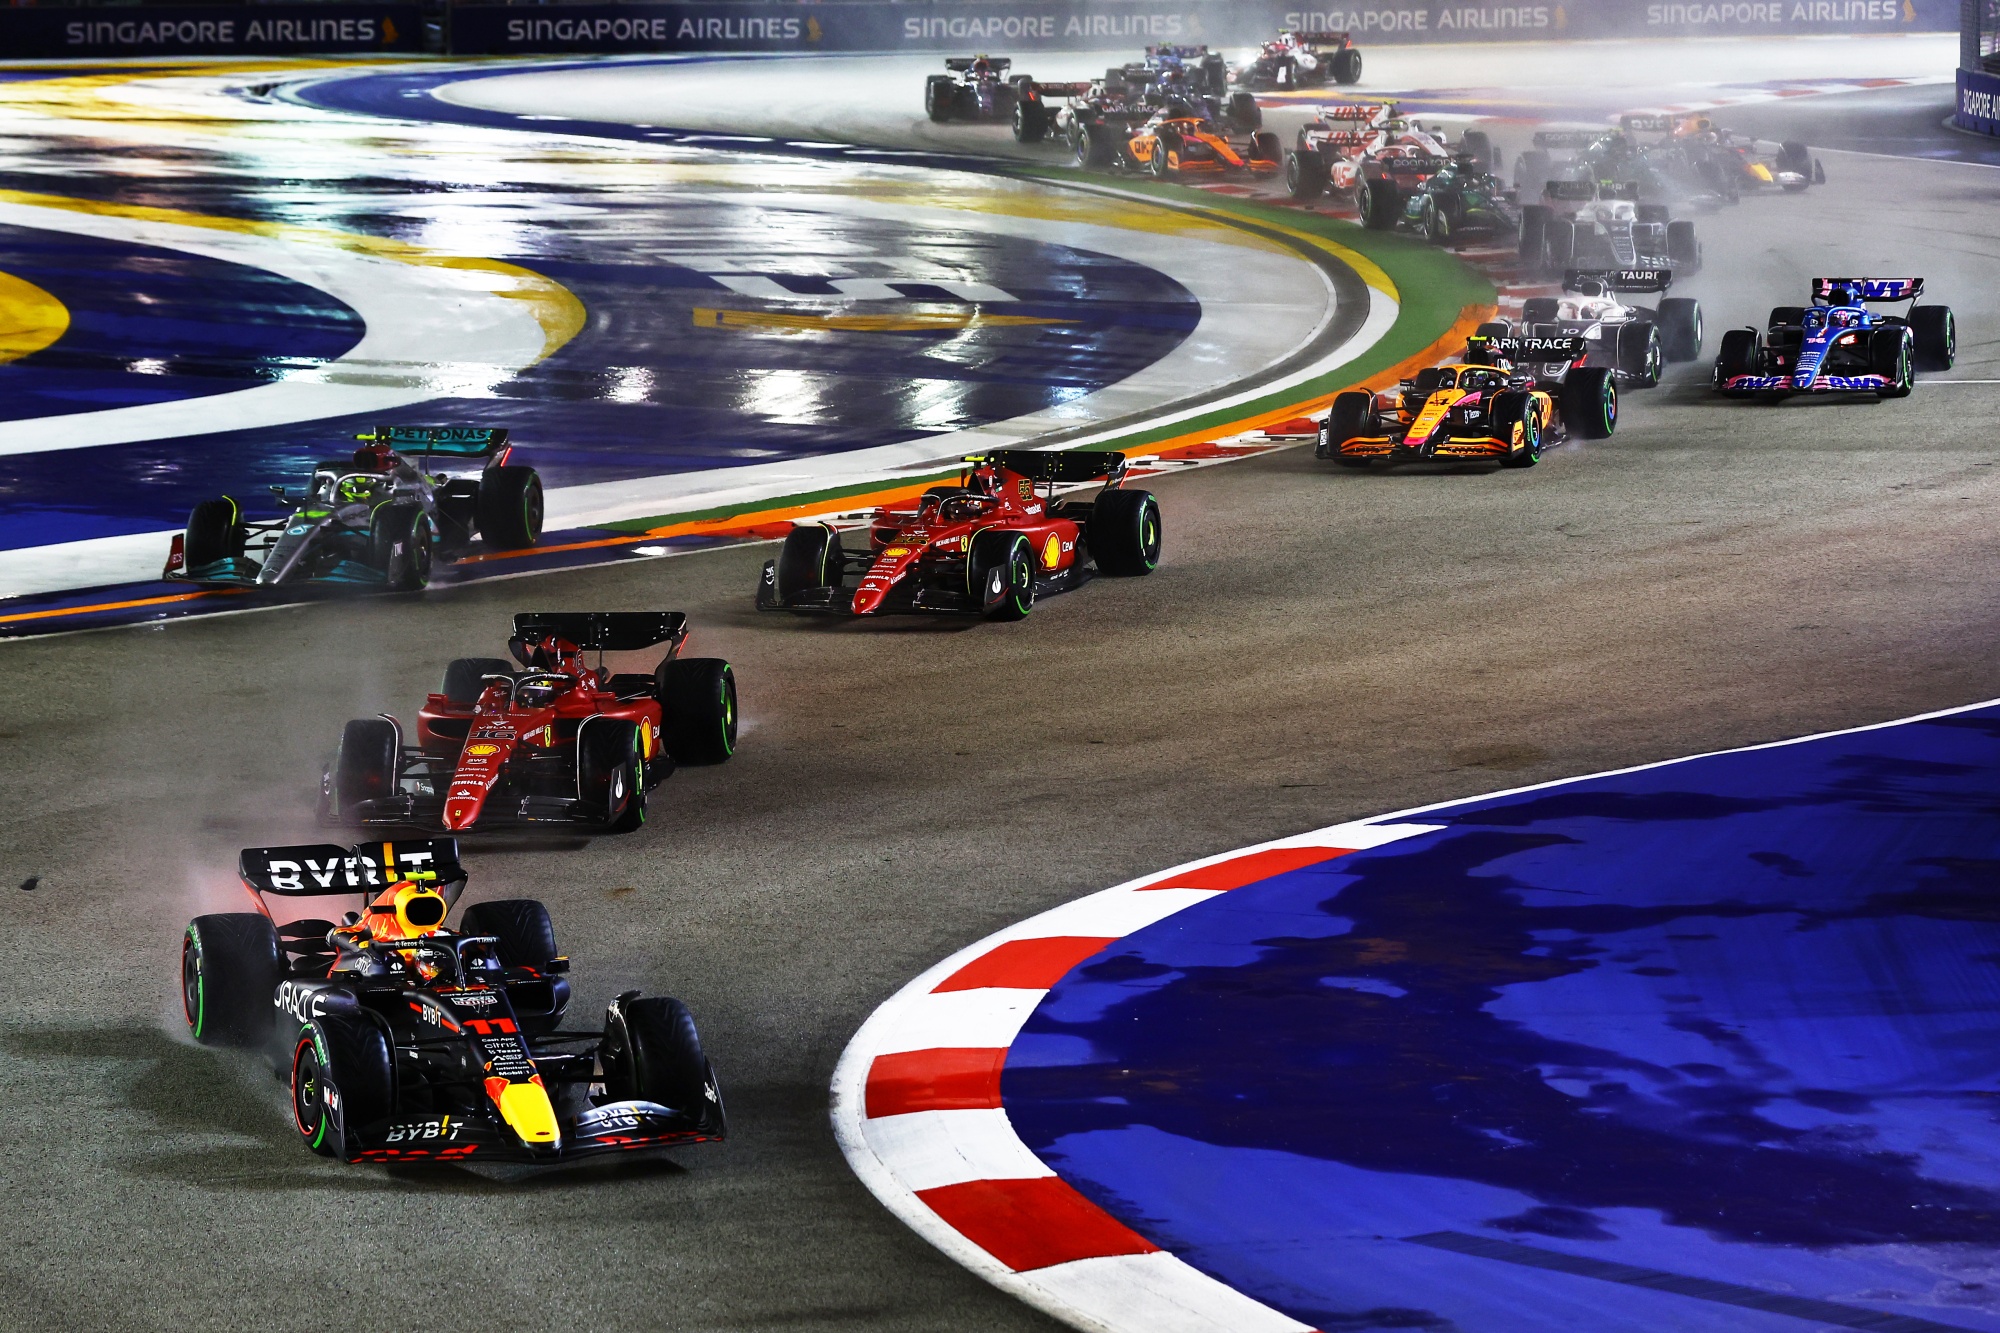 Singapore F1 Grand Prix Most Expensive Paddock Club Tickets Sell Out